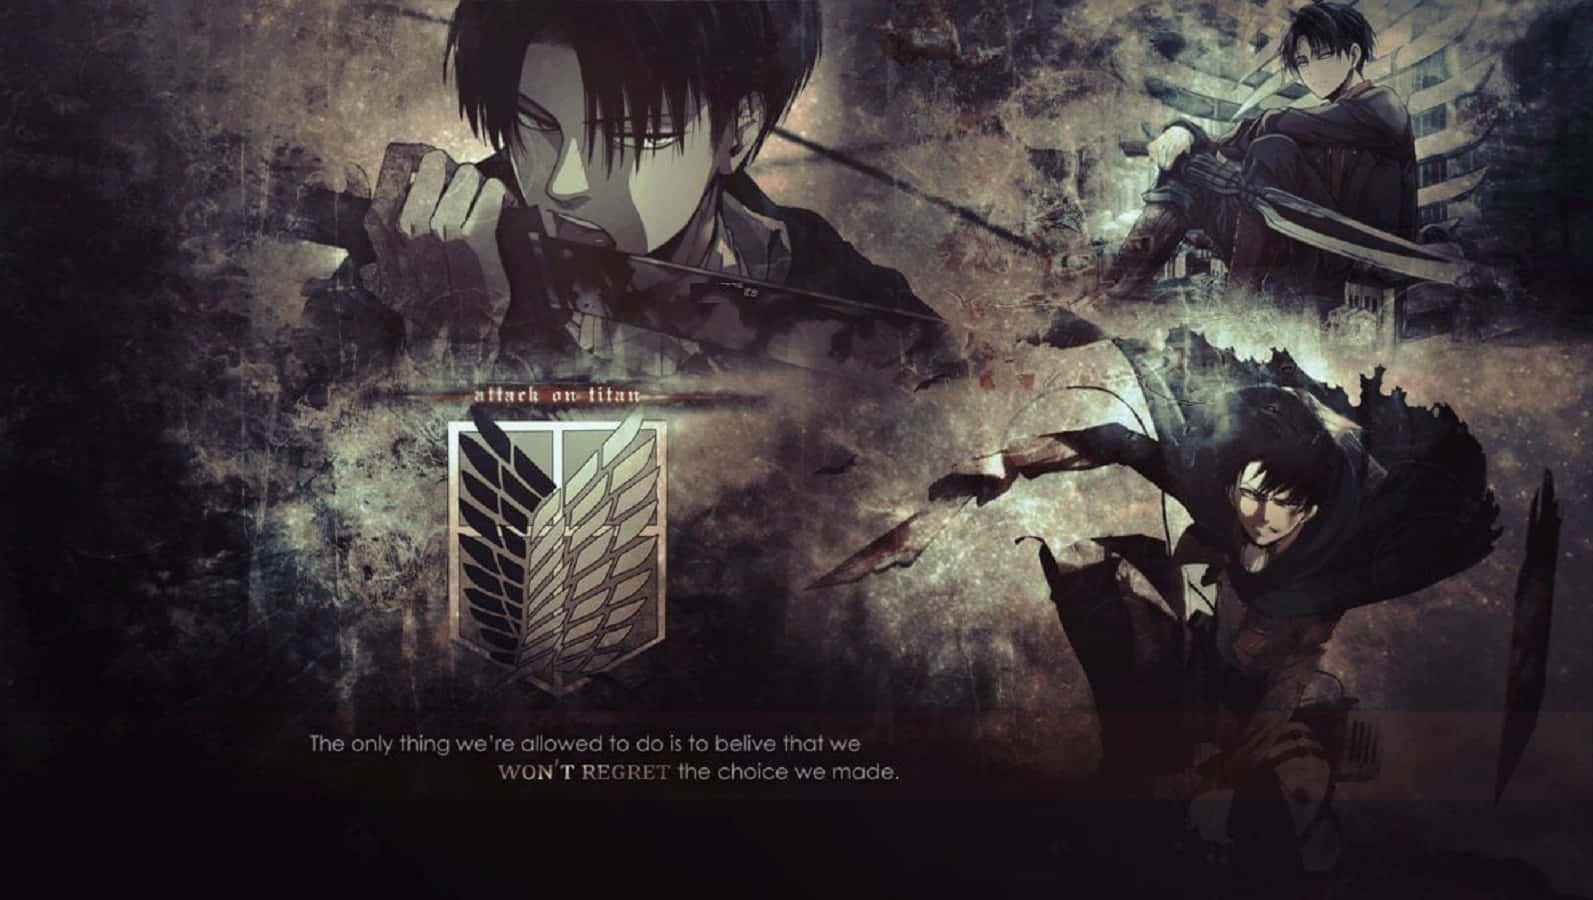 Join the Survey Corps for a journey to save humanity Wallpaper